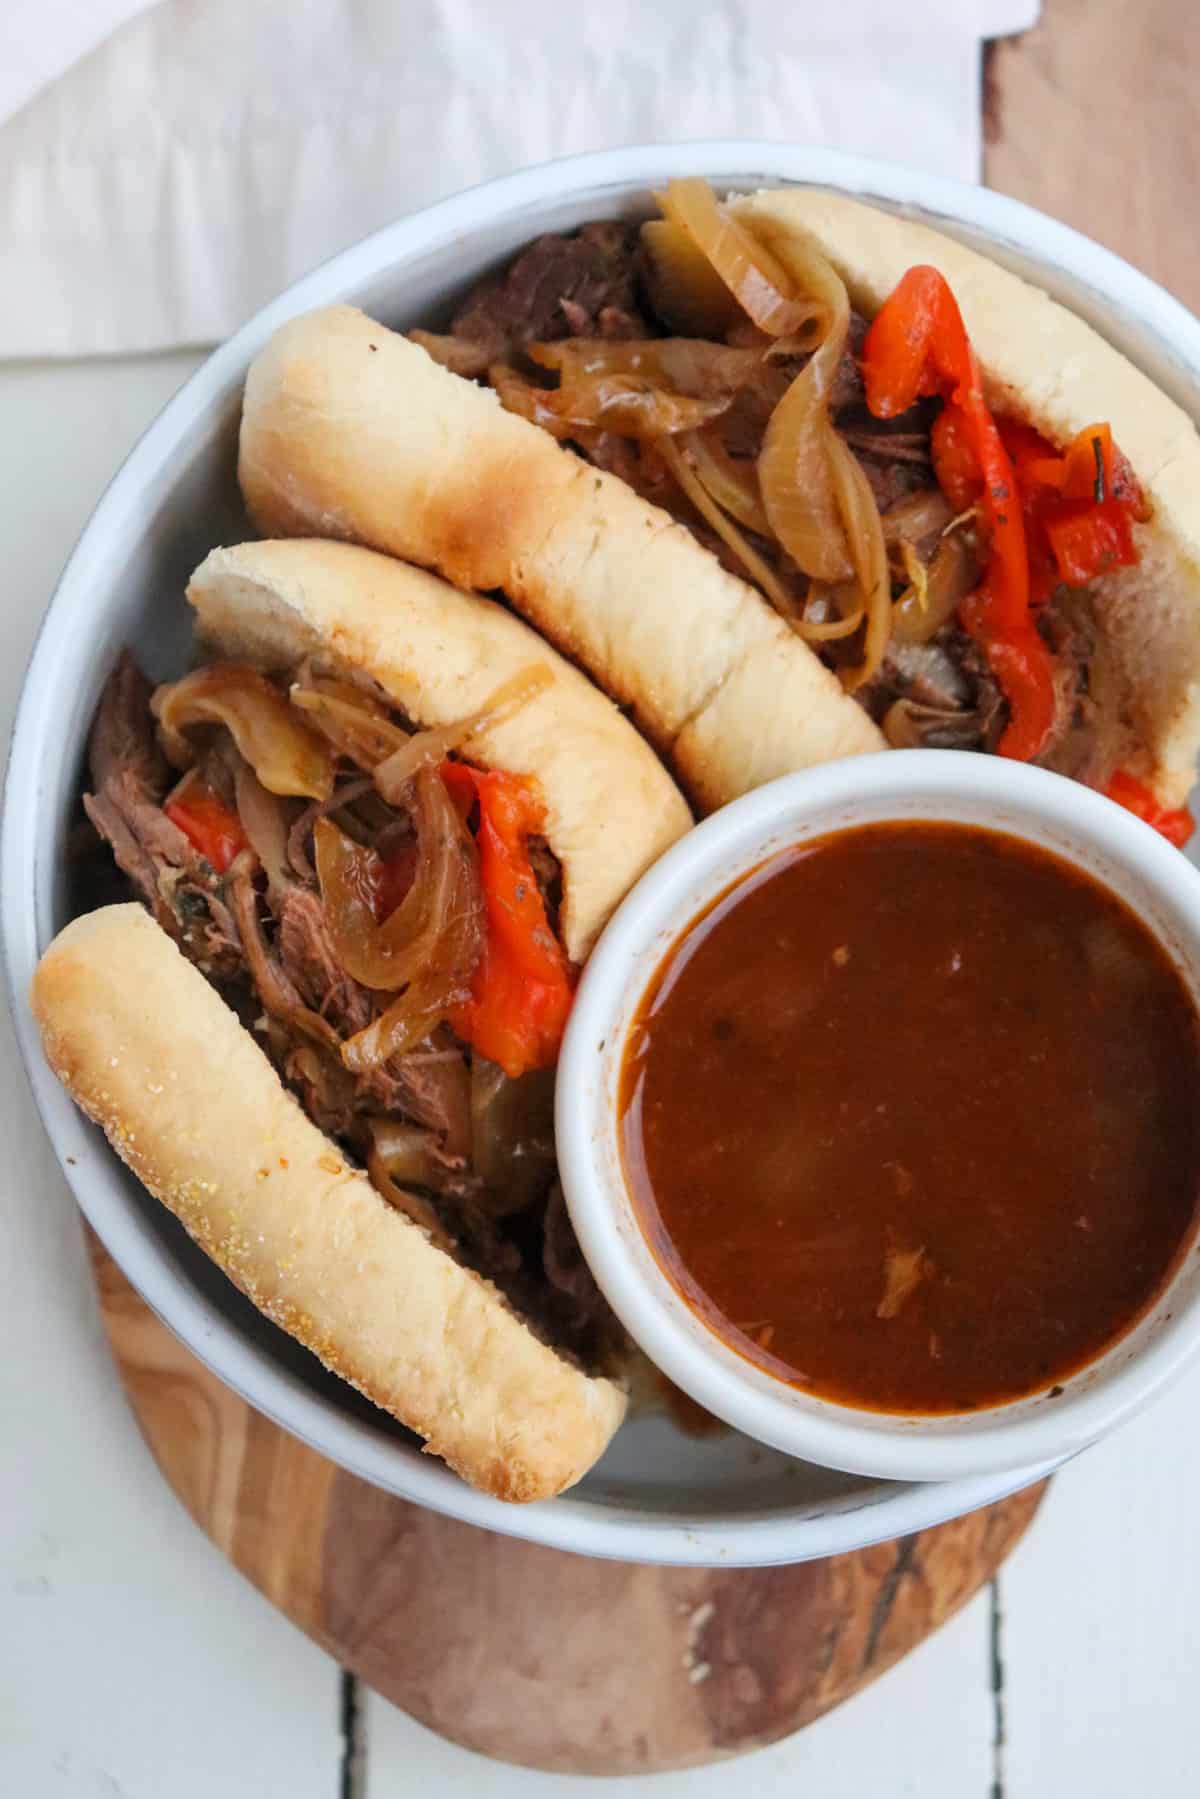 shredded venison on french rolls with gravy on the side.